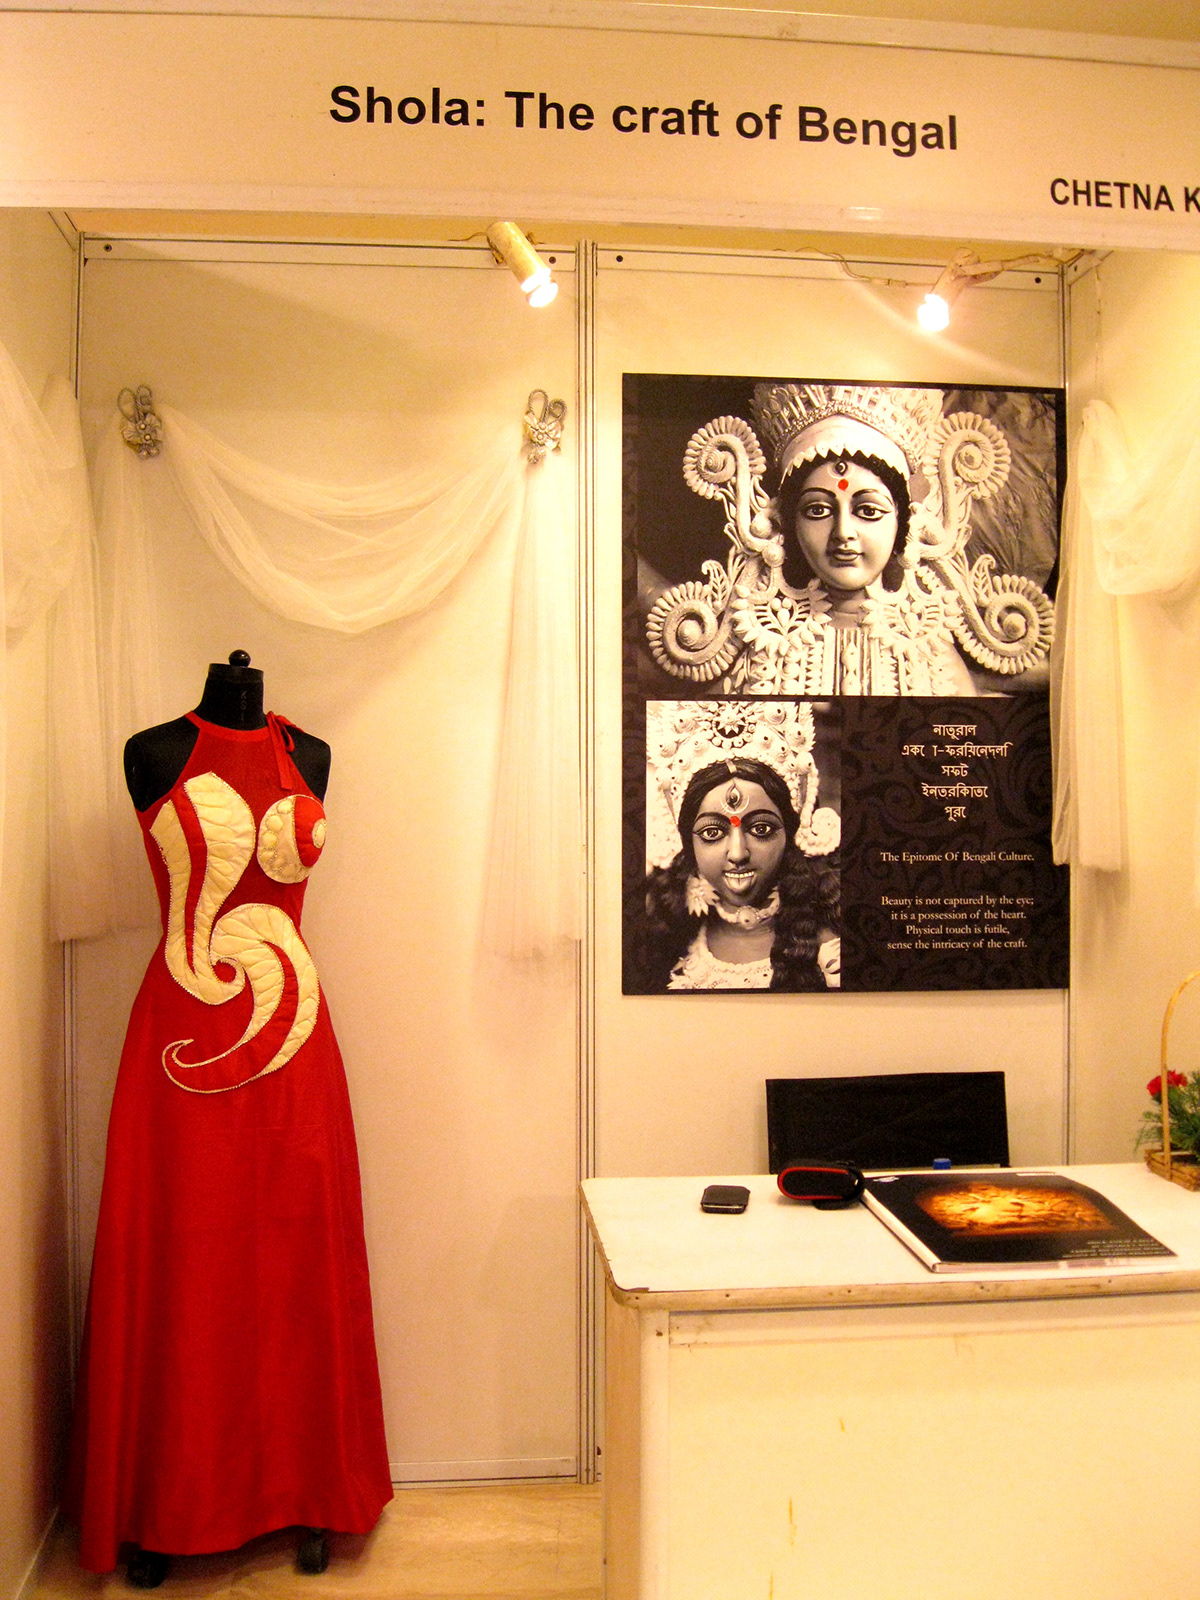 fashion exhibition Garment exhibition fashion show gurgaon Epi centre Garment display gown Couture garment sholapith Craft of Bengal quilting hand embroidery Source zone Fashion fare fashion shoot